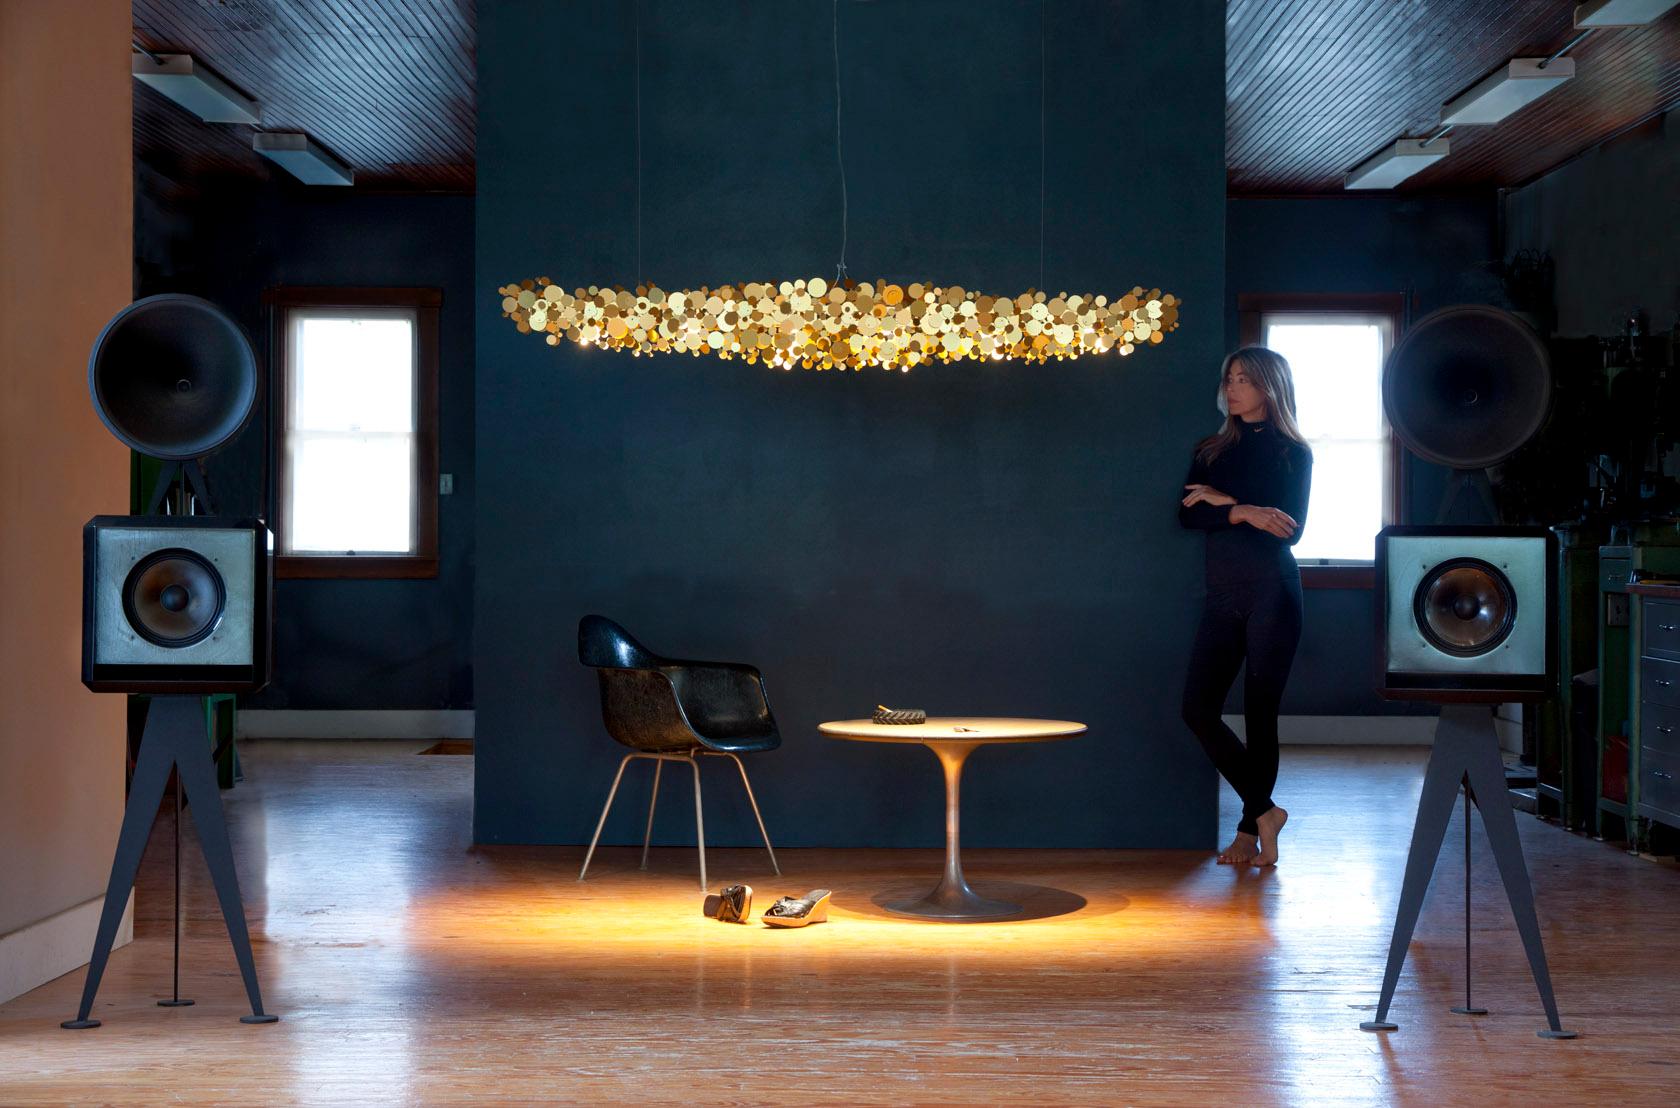 Ozone is a handmade gold anodized aluminum linear chandelier providing warm direct LED illumination when suspended over a dining table, kitchen island or conference table. Clusters of gold discs are arranged at different angles creating a surface of